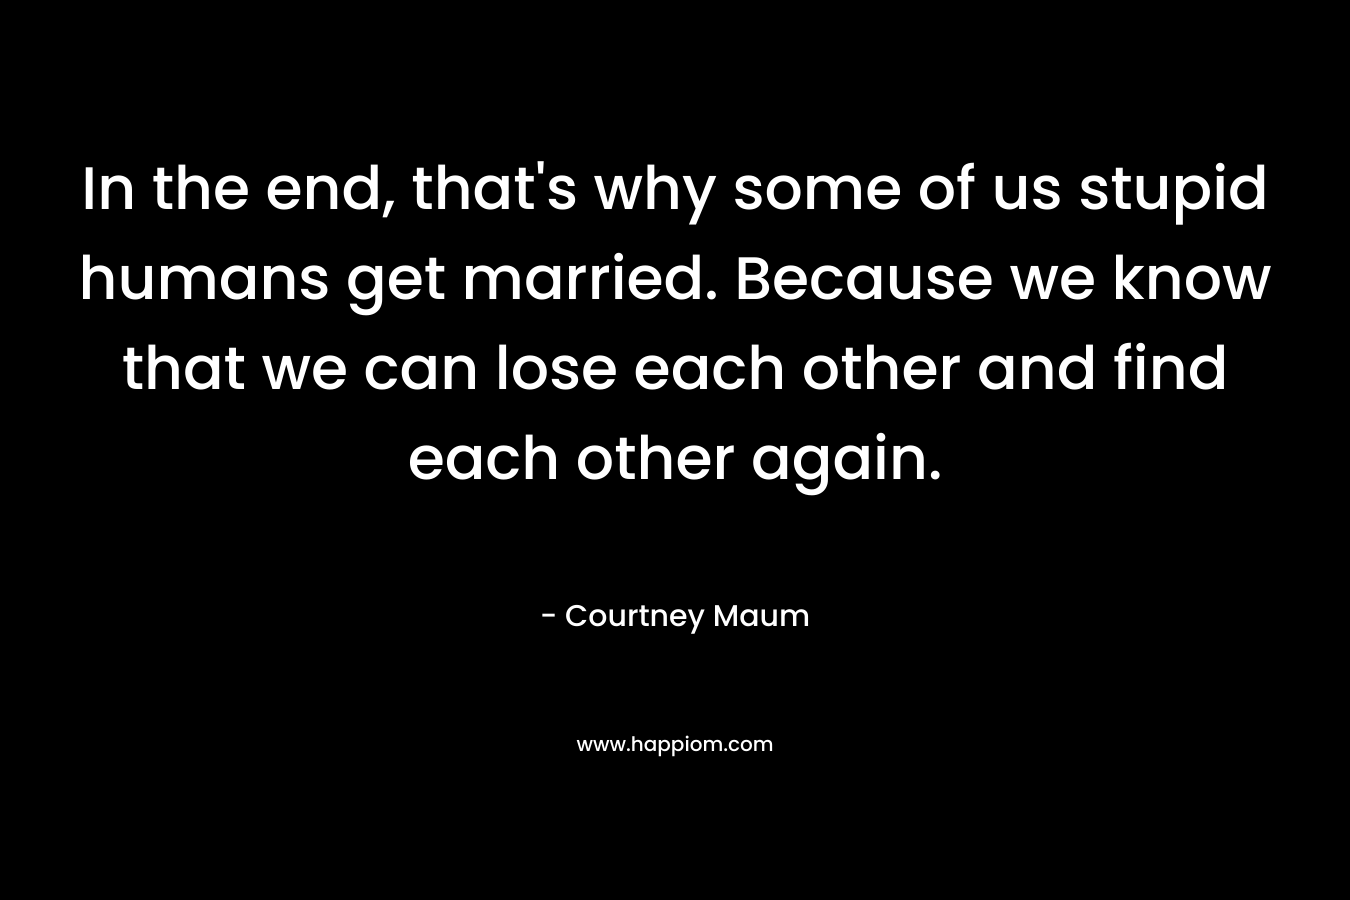 In the end, that’s why some of us stupid humans get married. Because we know that we can lose each other and find each other again. – Courtney Maum